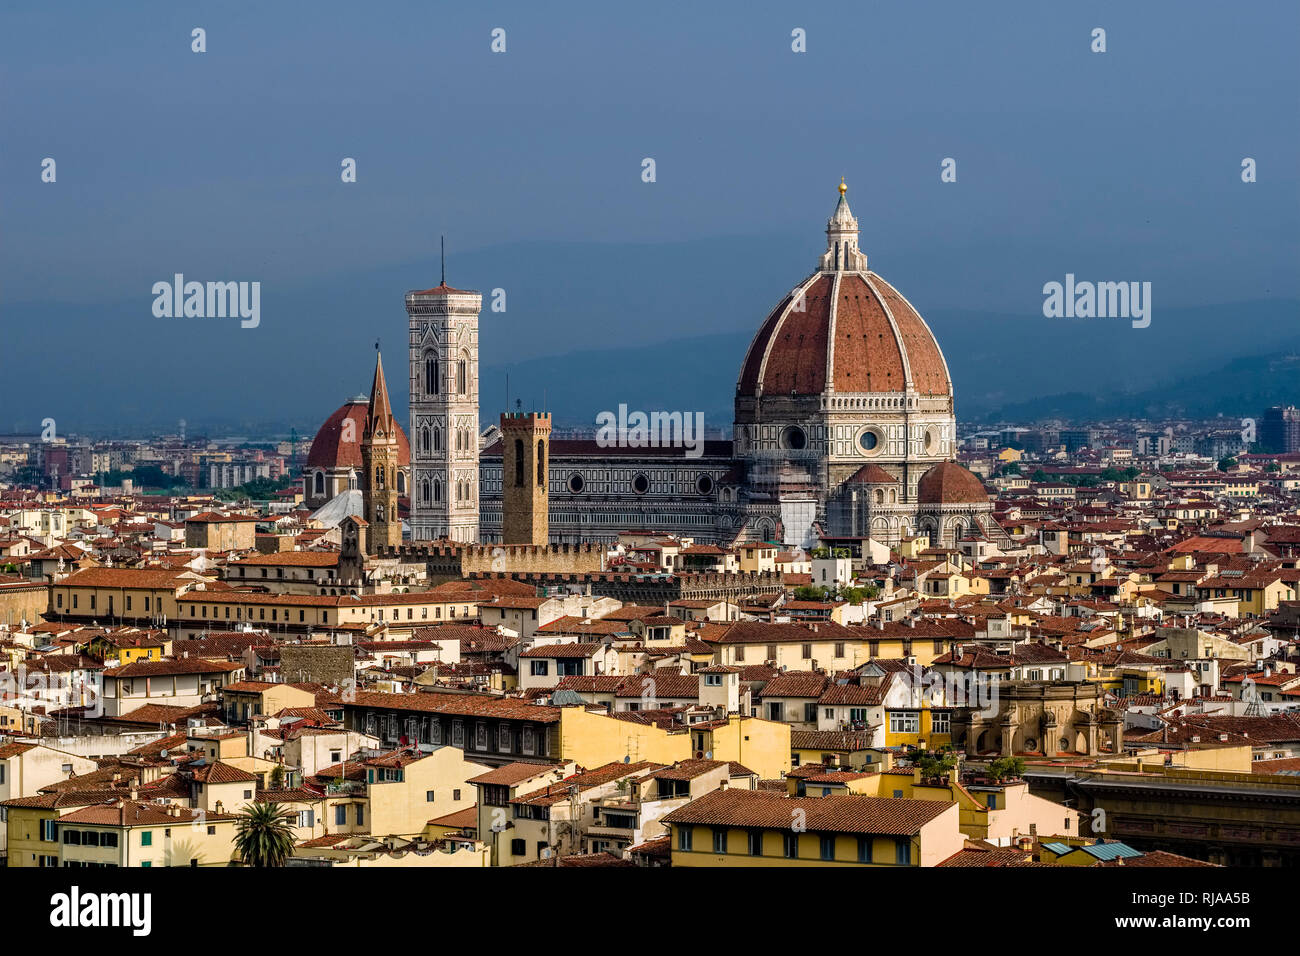 Aerial view on the town from Piazza Michelangelo, Duomo standing out Stock Photo